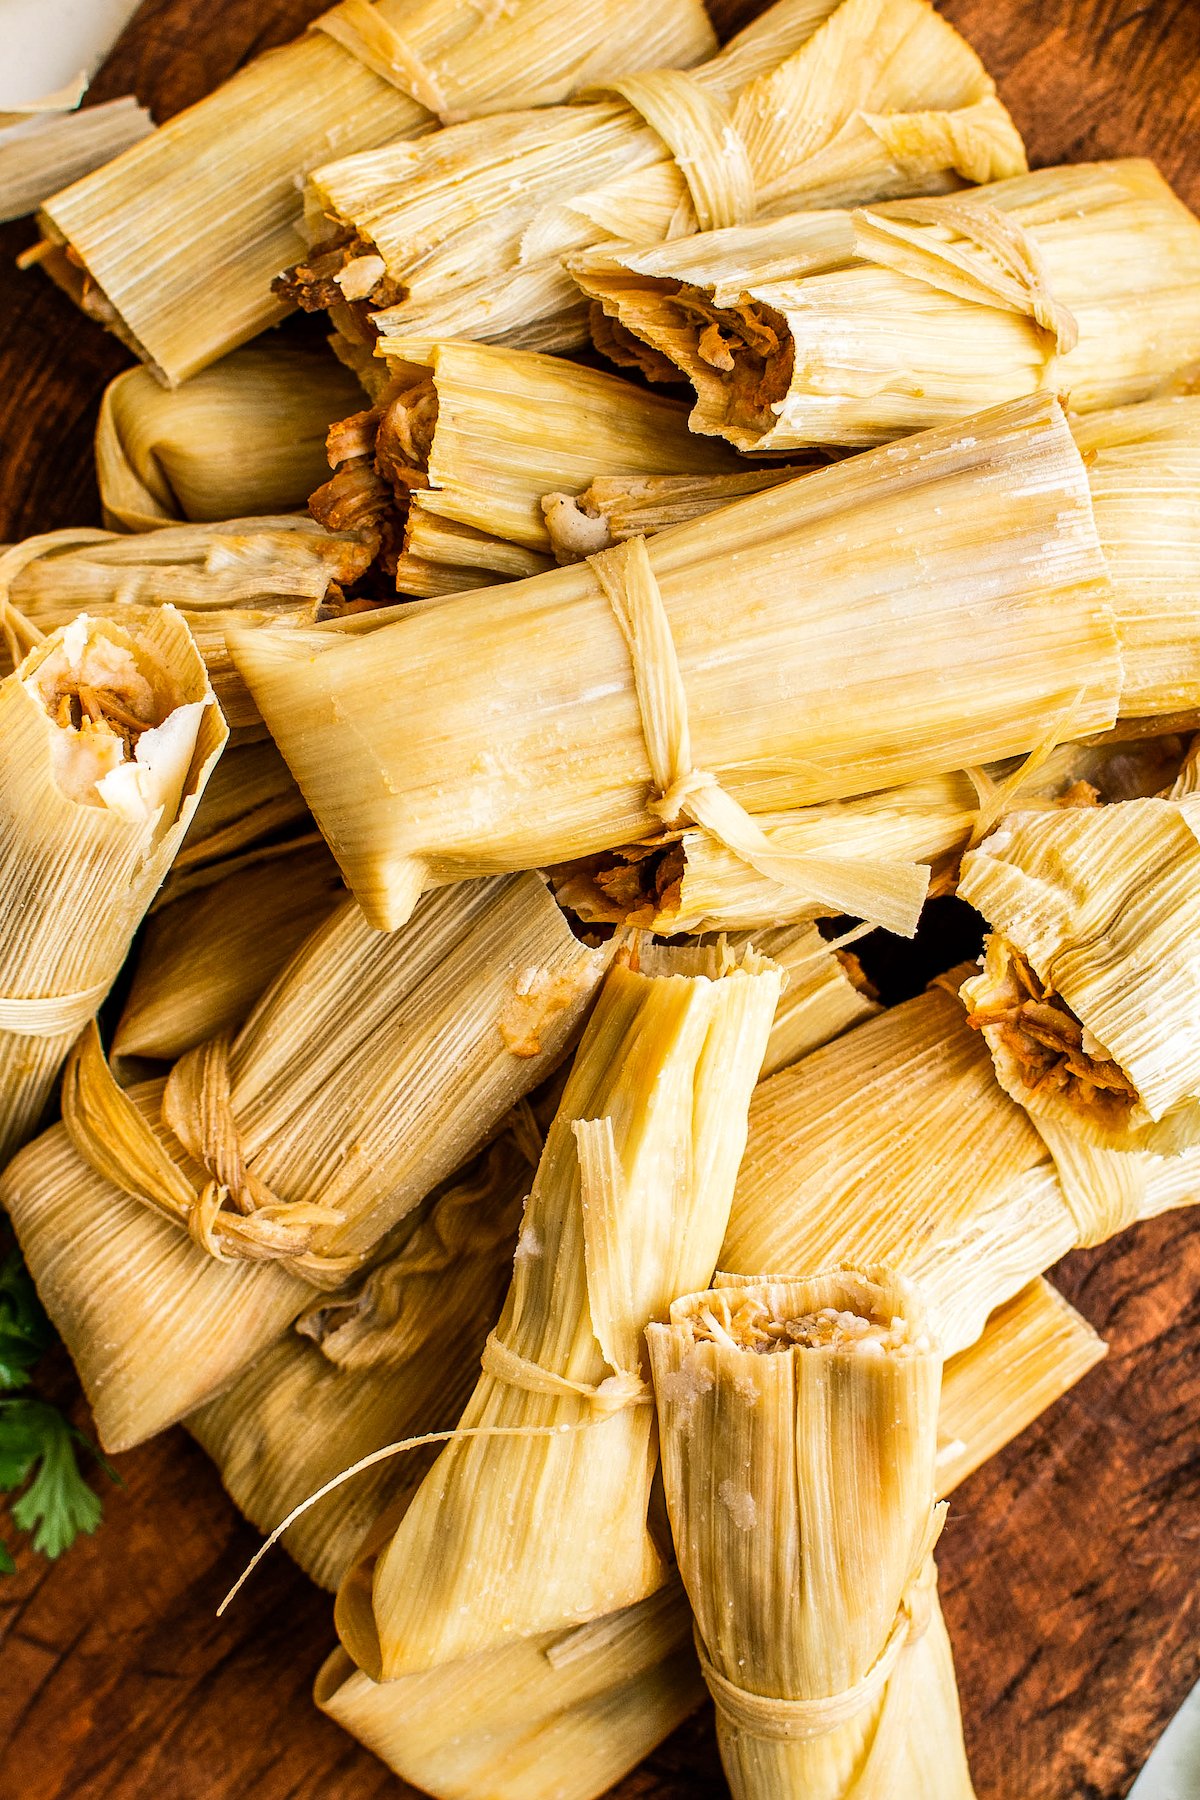 How to Make Tamales: A Step-by-Step Guide With Photos